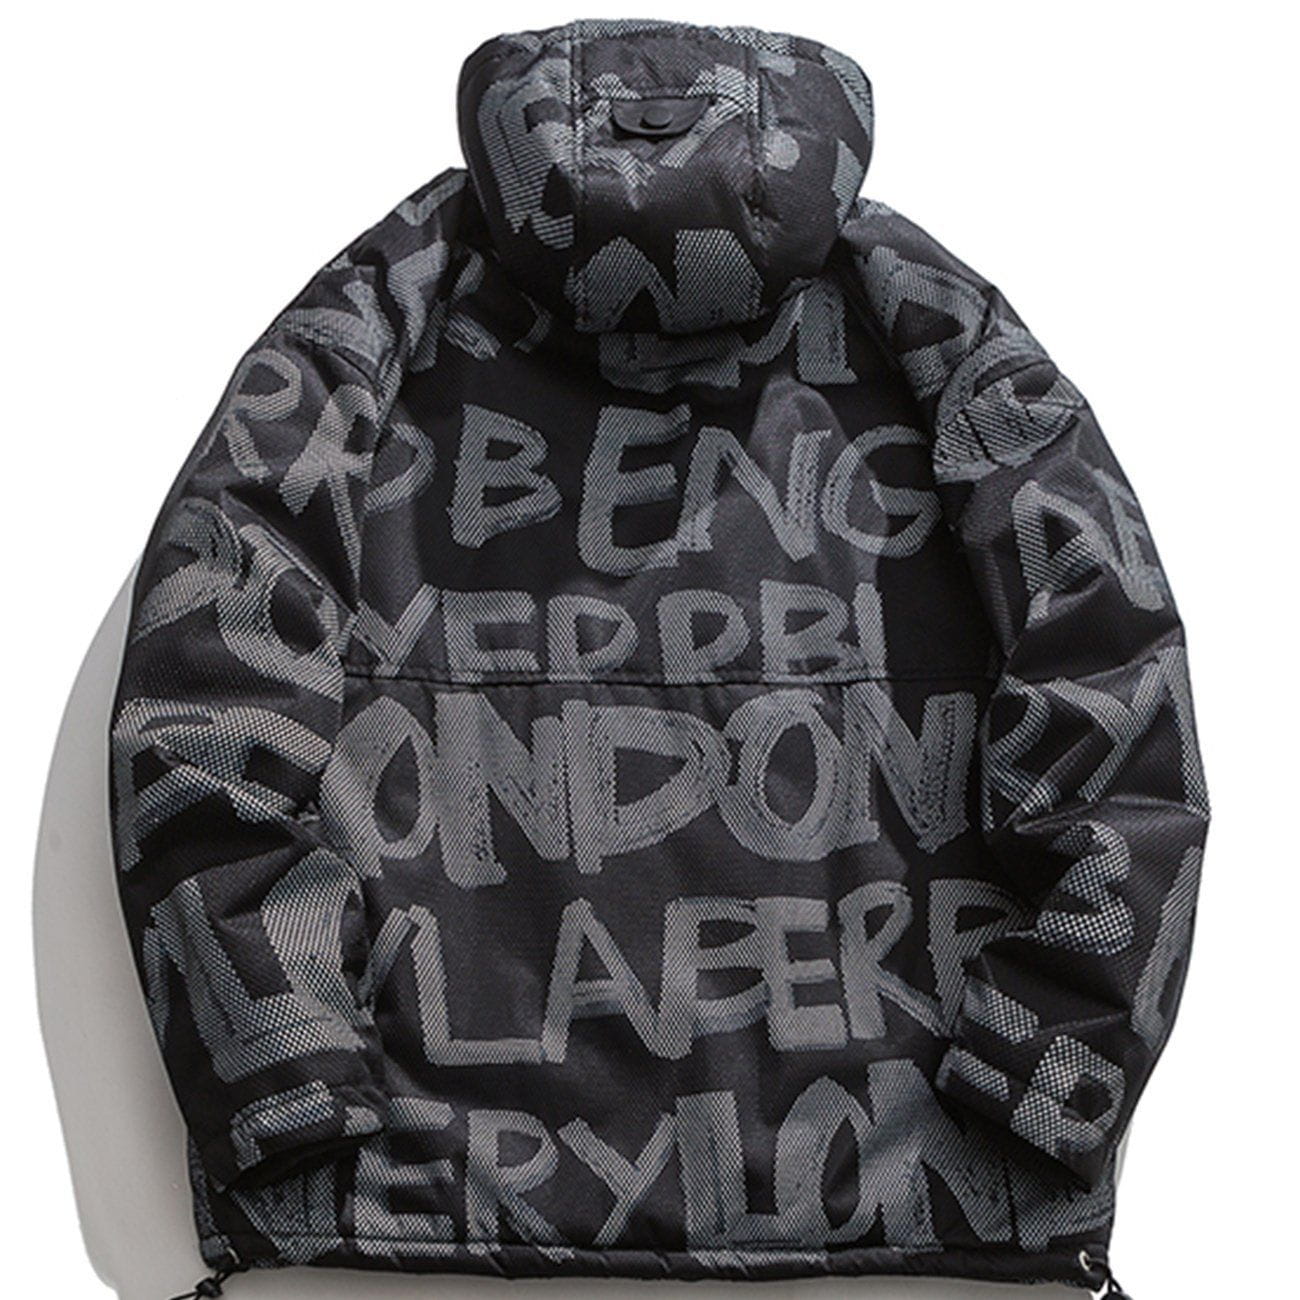 LUXENFY™ - Graffiti Letters Hooded Winter Coat luxenfy.com